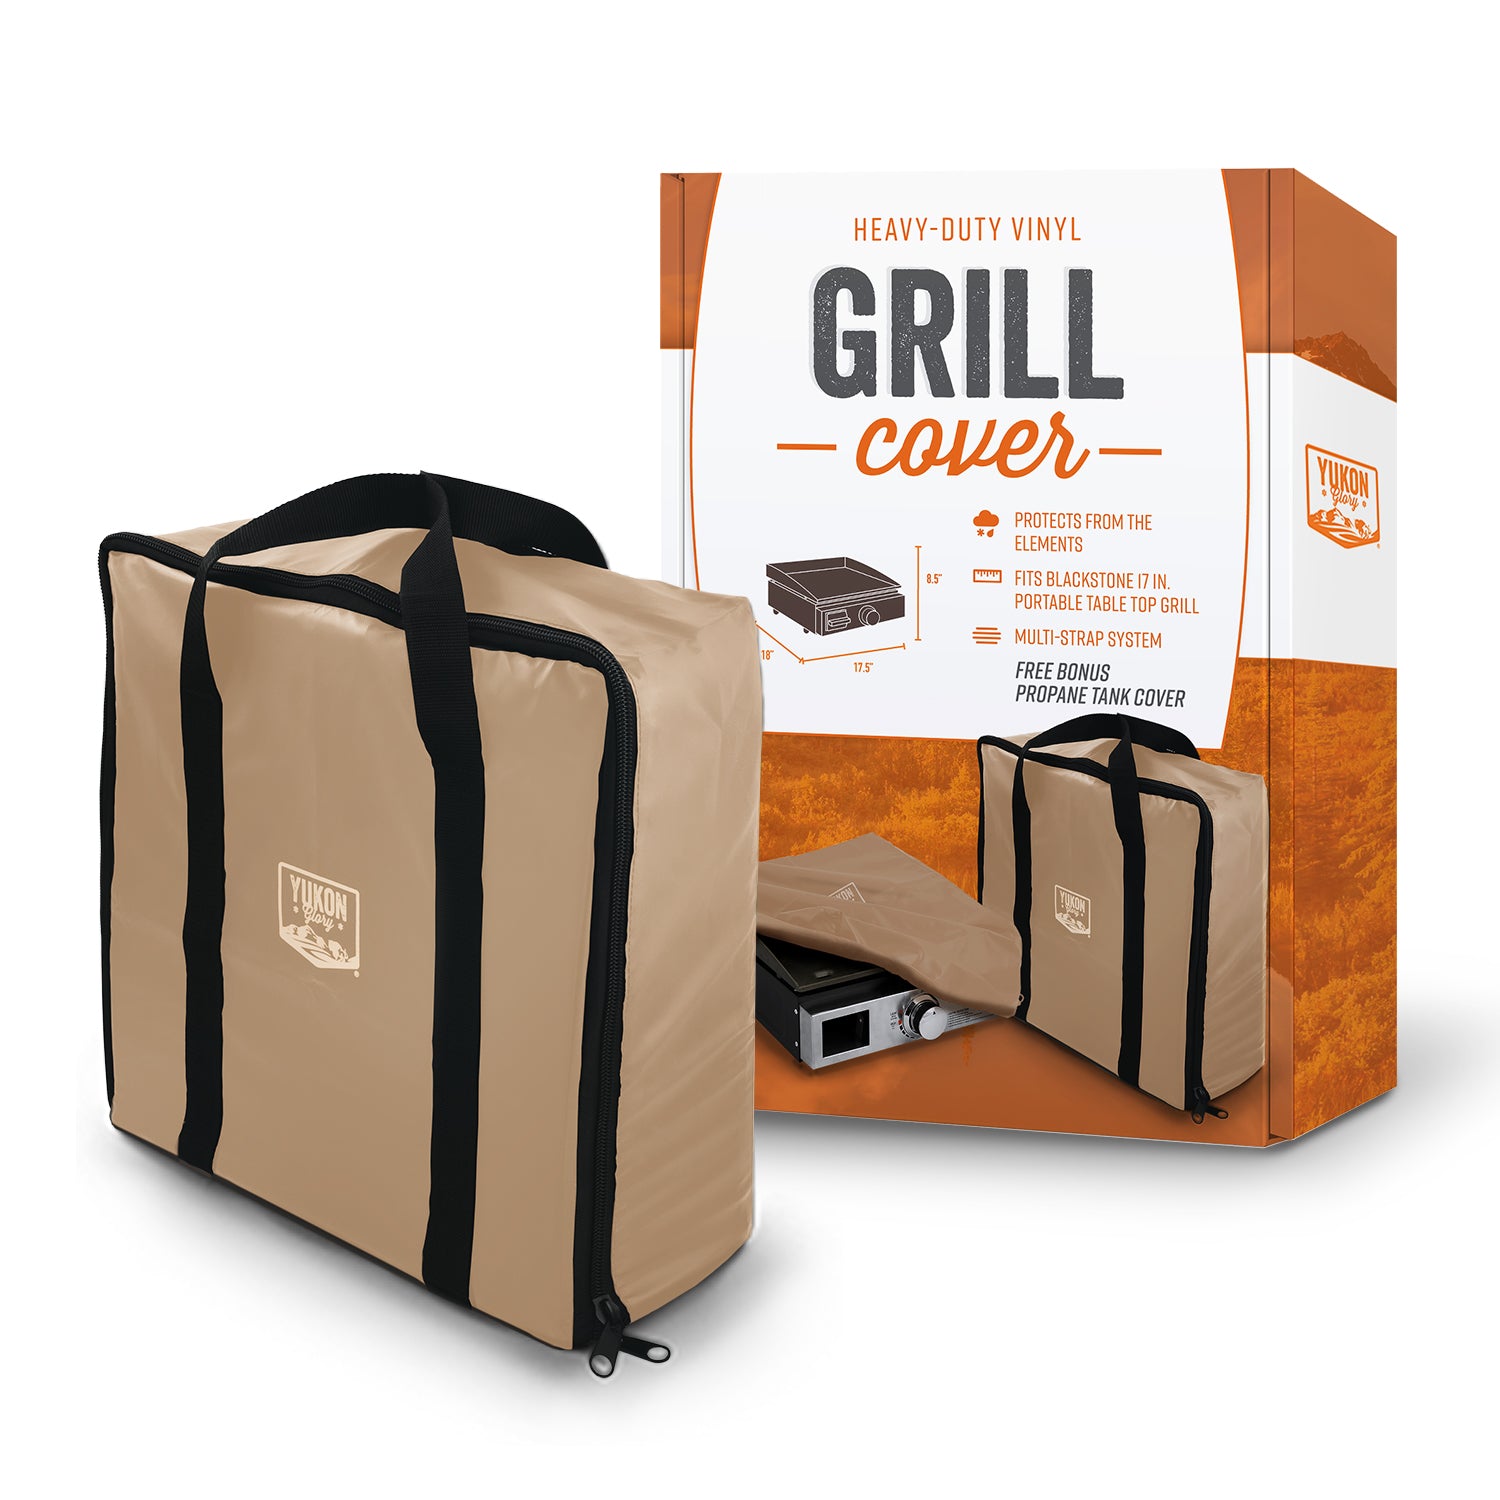 Yukon Glory Premium Blackstone Cover - The Tan Blackstone Griddle Cover & Carrying Case Made for Blackstone 17 Inch Table Top Griddles - Durable and Waterproof 17 Inch Blackstone Griddle Cover - Yukon Glory